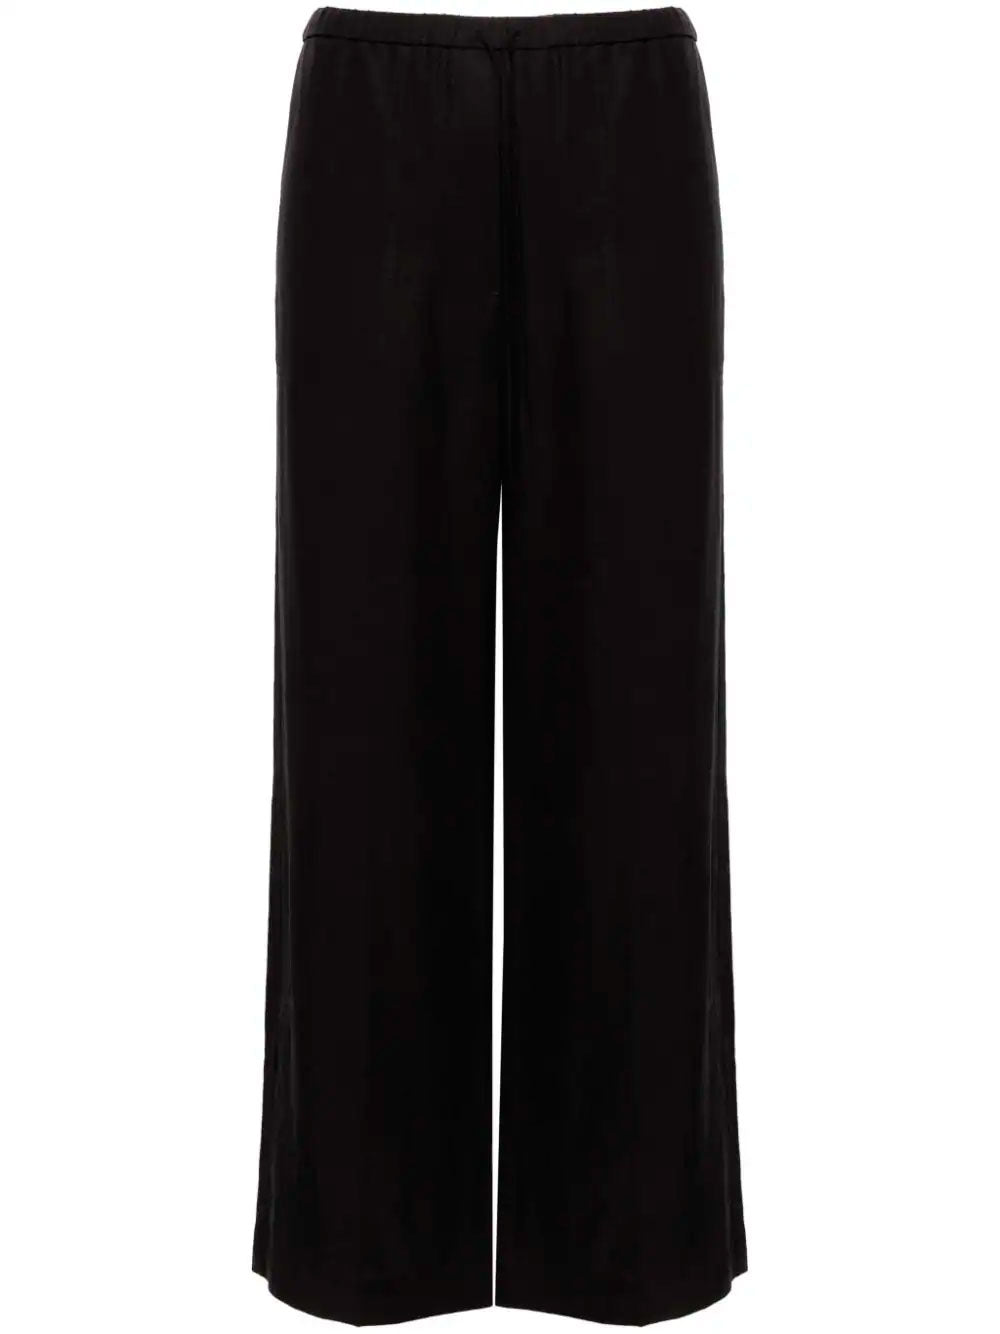 Tally trousers